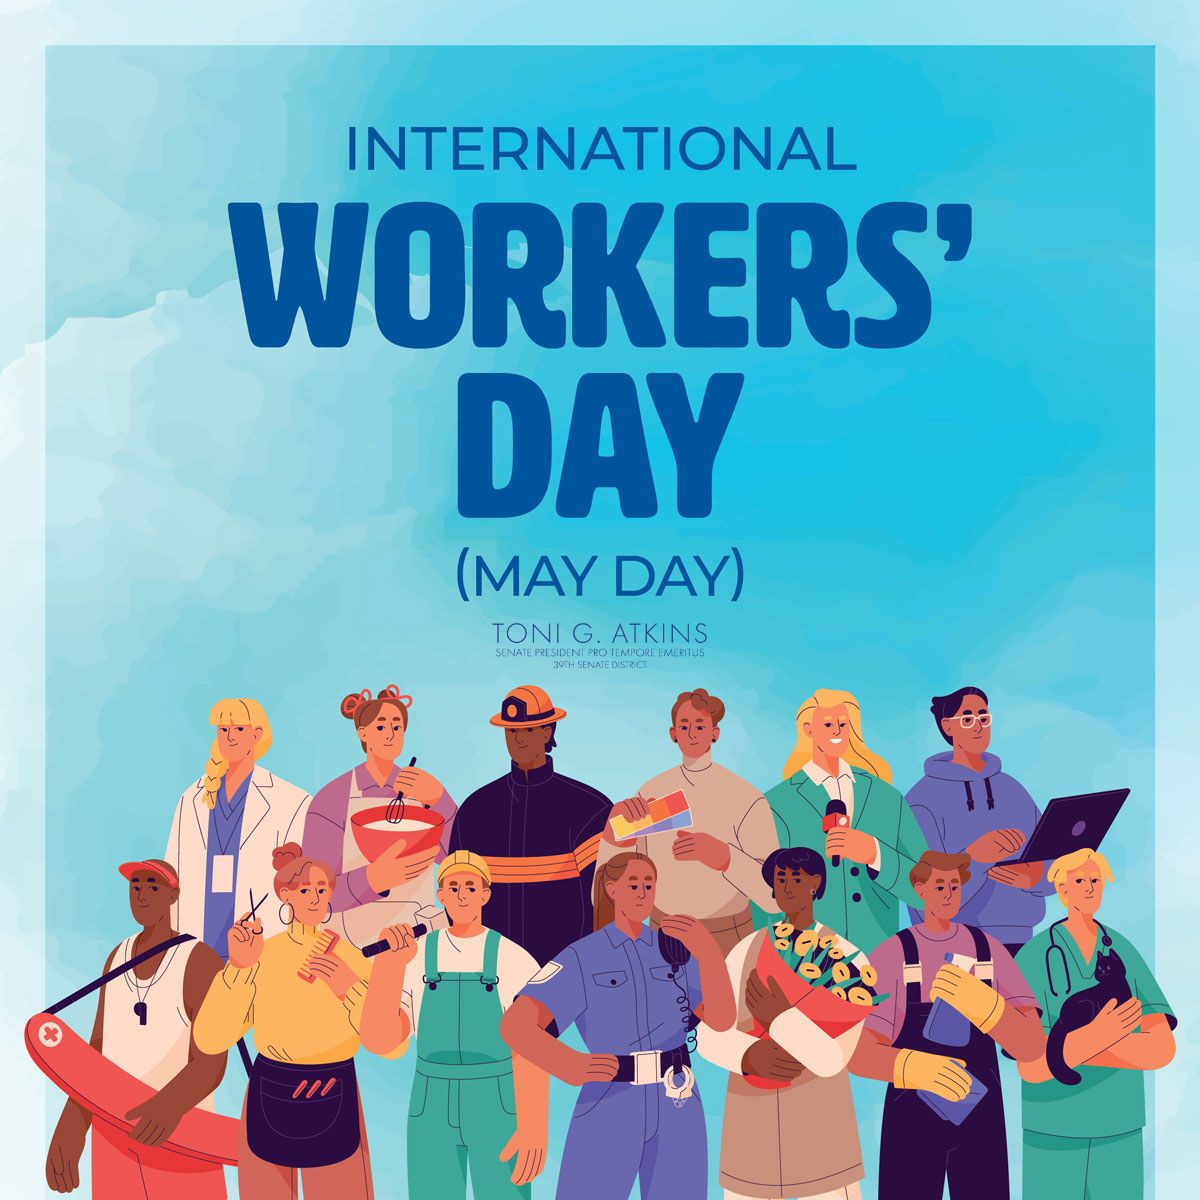 On #InternationalWorkersDay, we celebrate workers and the labor movement. Let’s continue building an economy that supports our workers. #MayDay